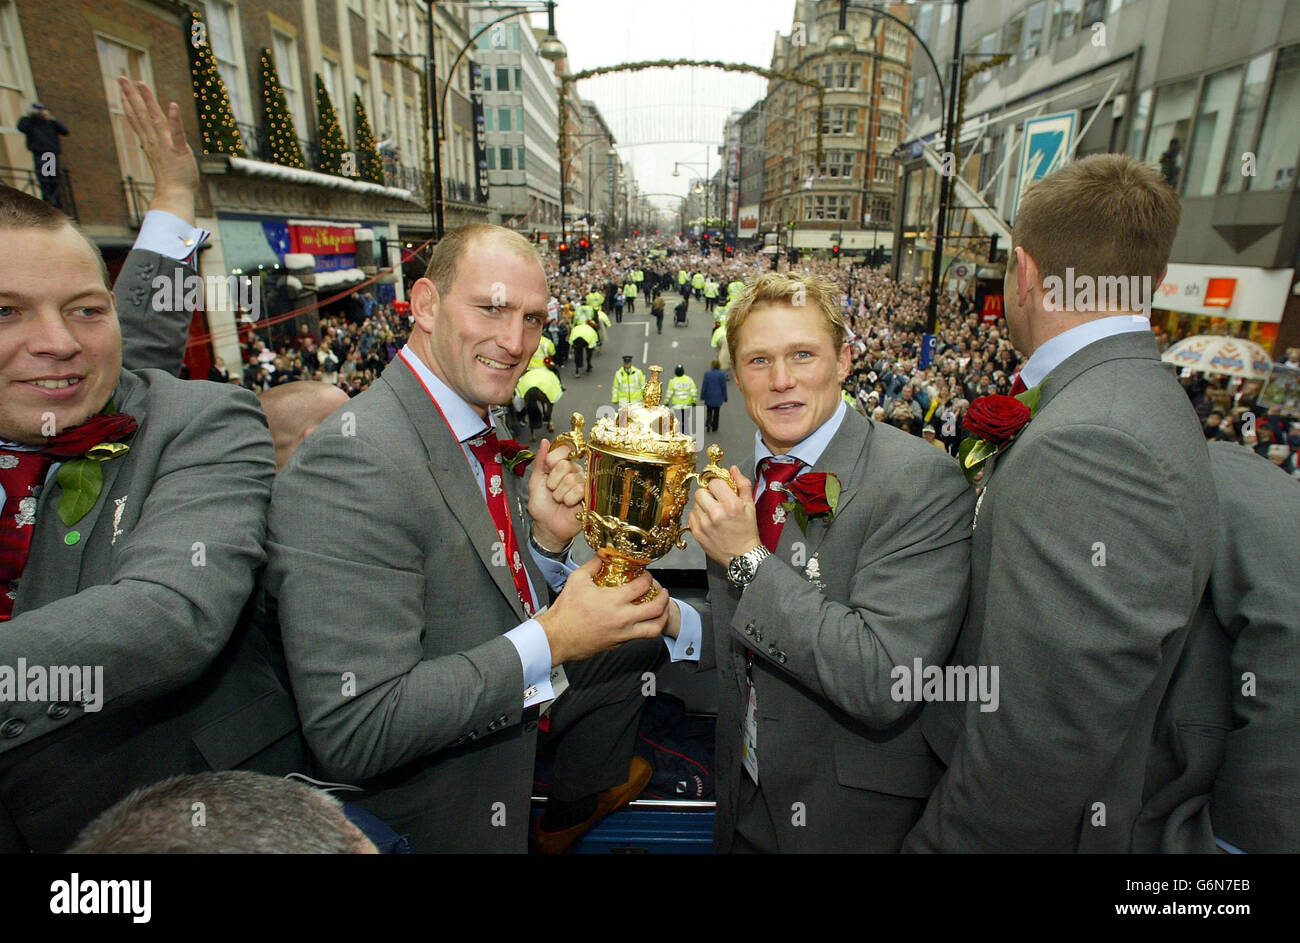 England player Lawrence Dallaglio and Josh Lewsey during the England Rugby World Cup team victory parade, in central London. The two open-topped buses arrived outside the National Gallery to a rapturous welcome from thousands of fans.The square was a sea of red and white flags as the nation's heroes waved to fans. Stock Photo